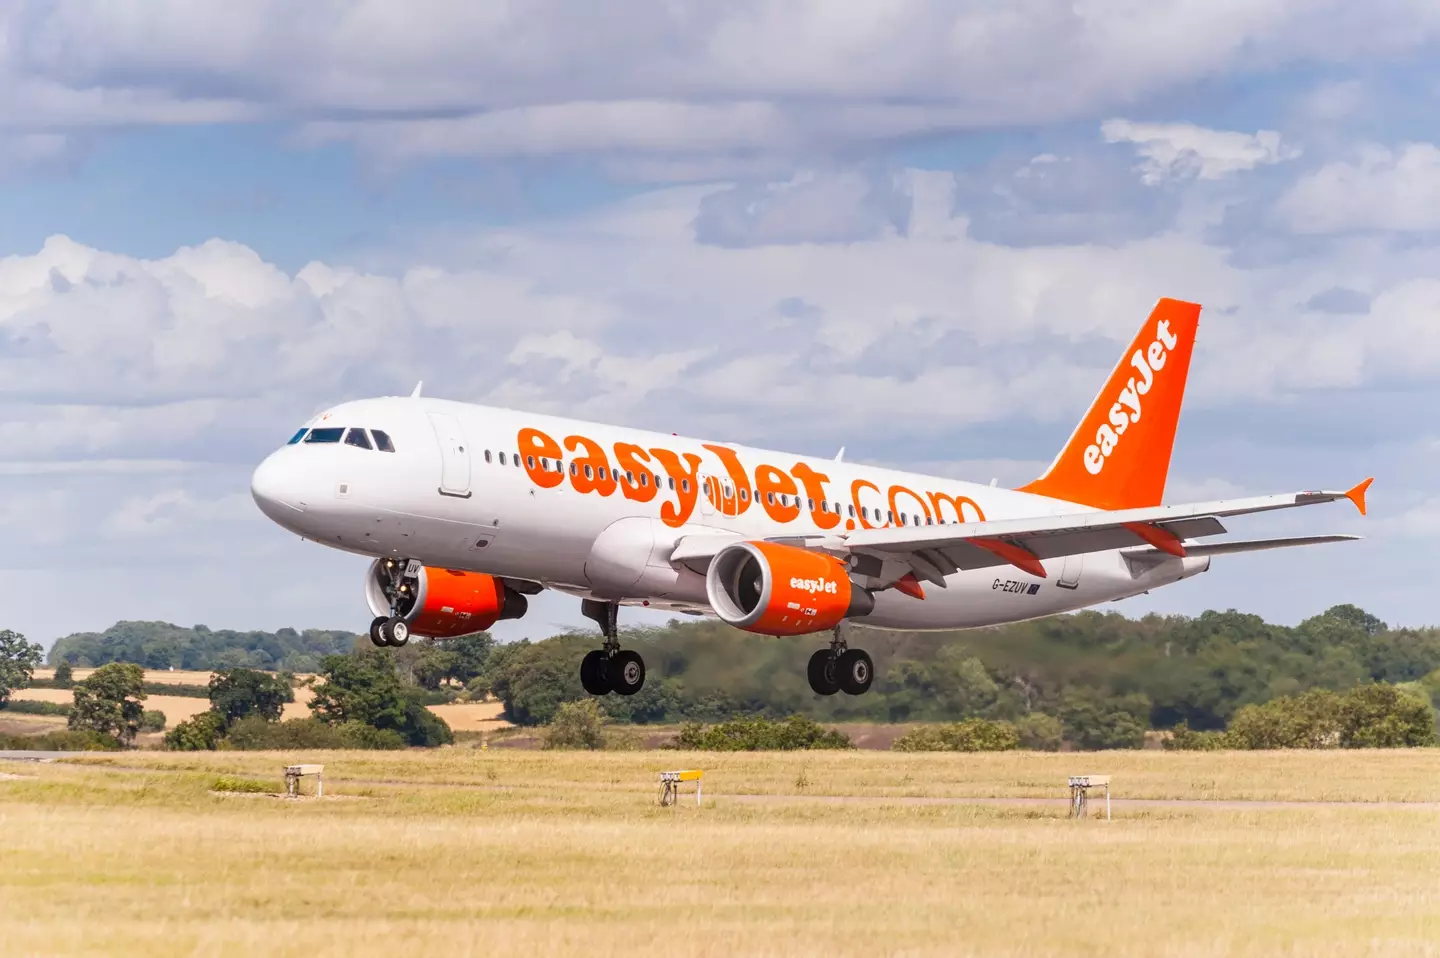 The 21-year-old was training to be an easyJet pilot when she died.